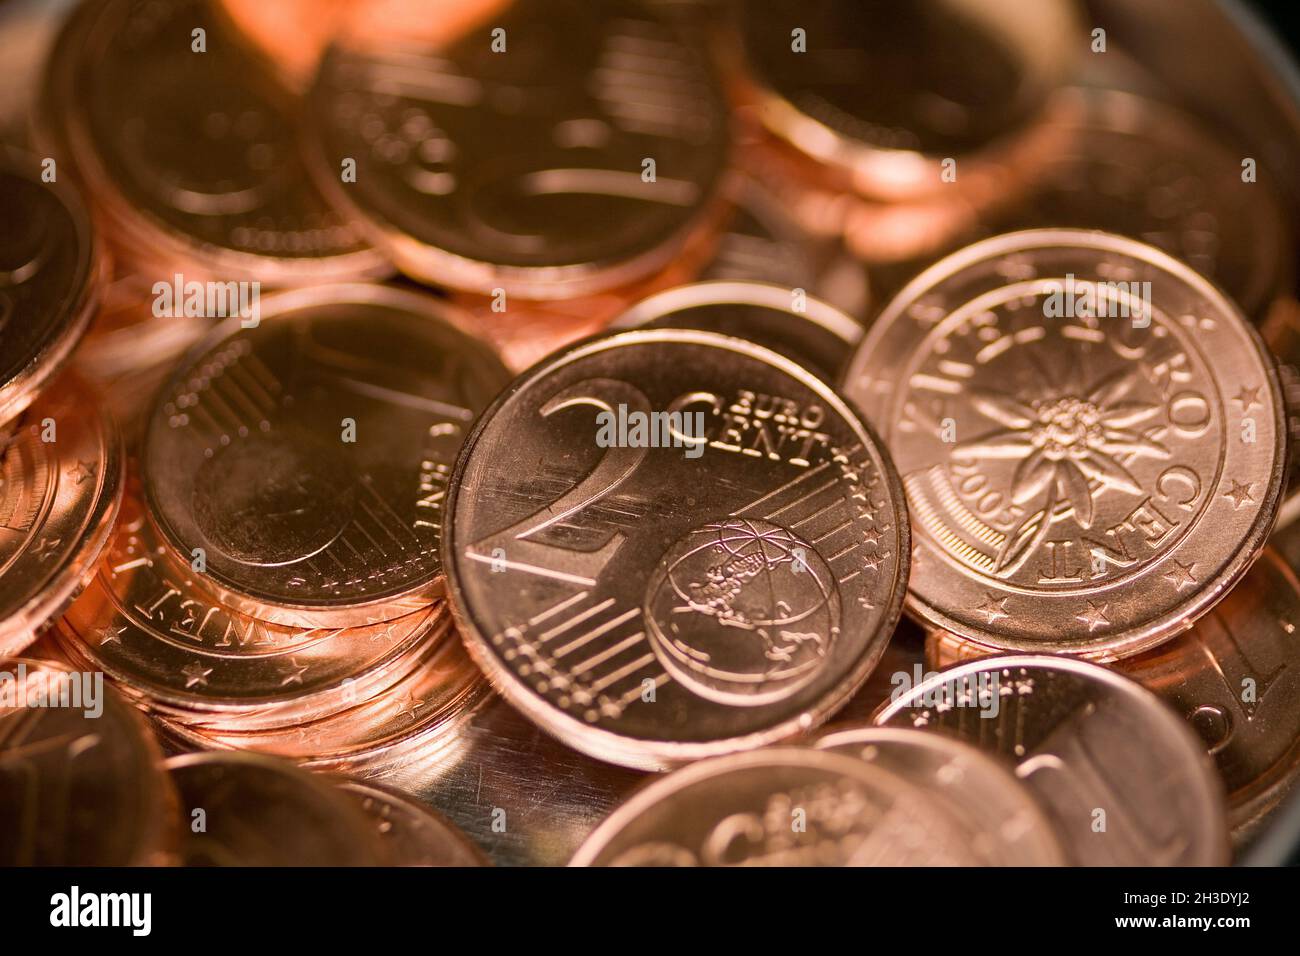 new 2 cent coins from Austria, Austria Stock Photo